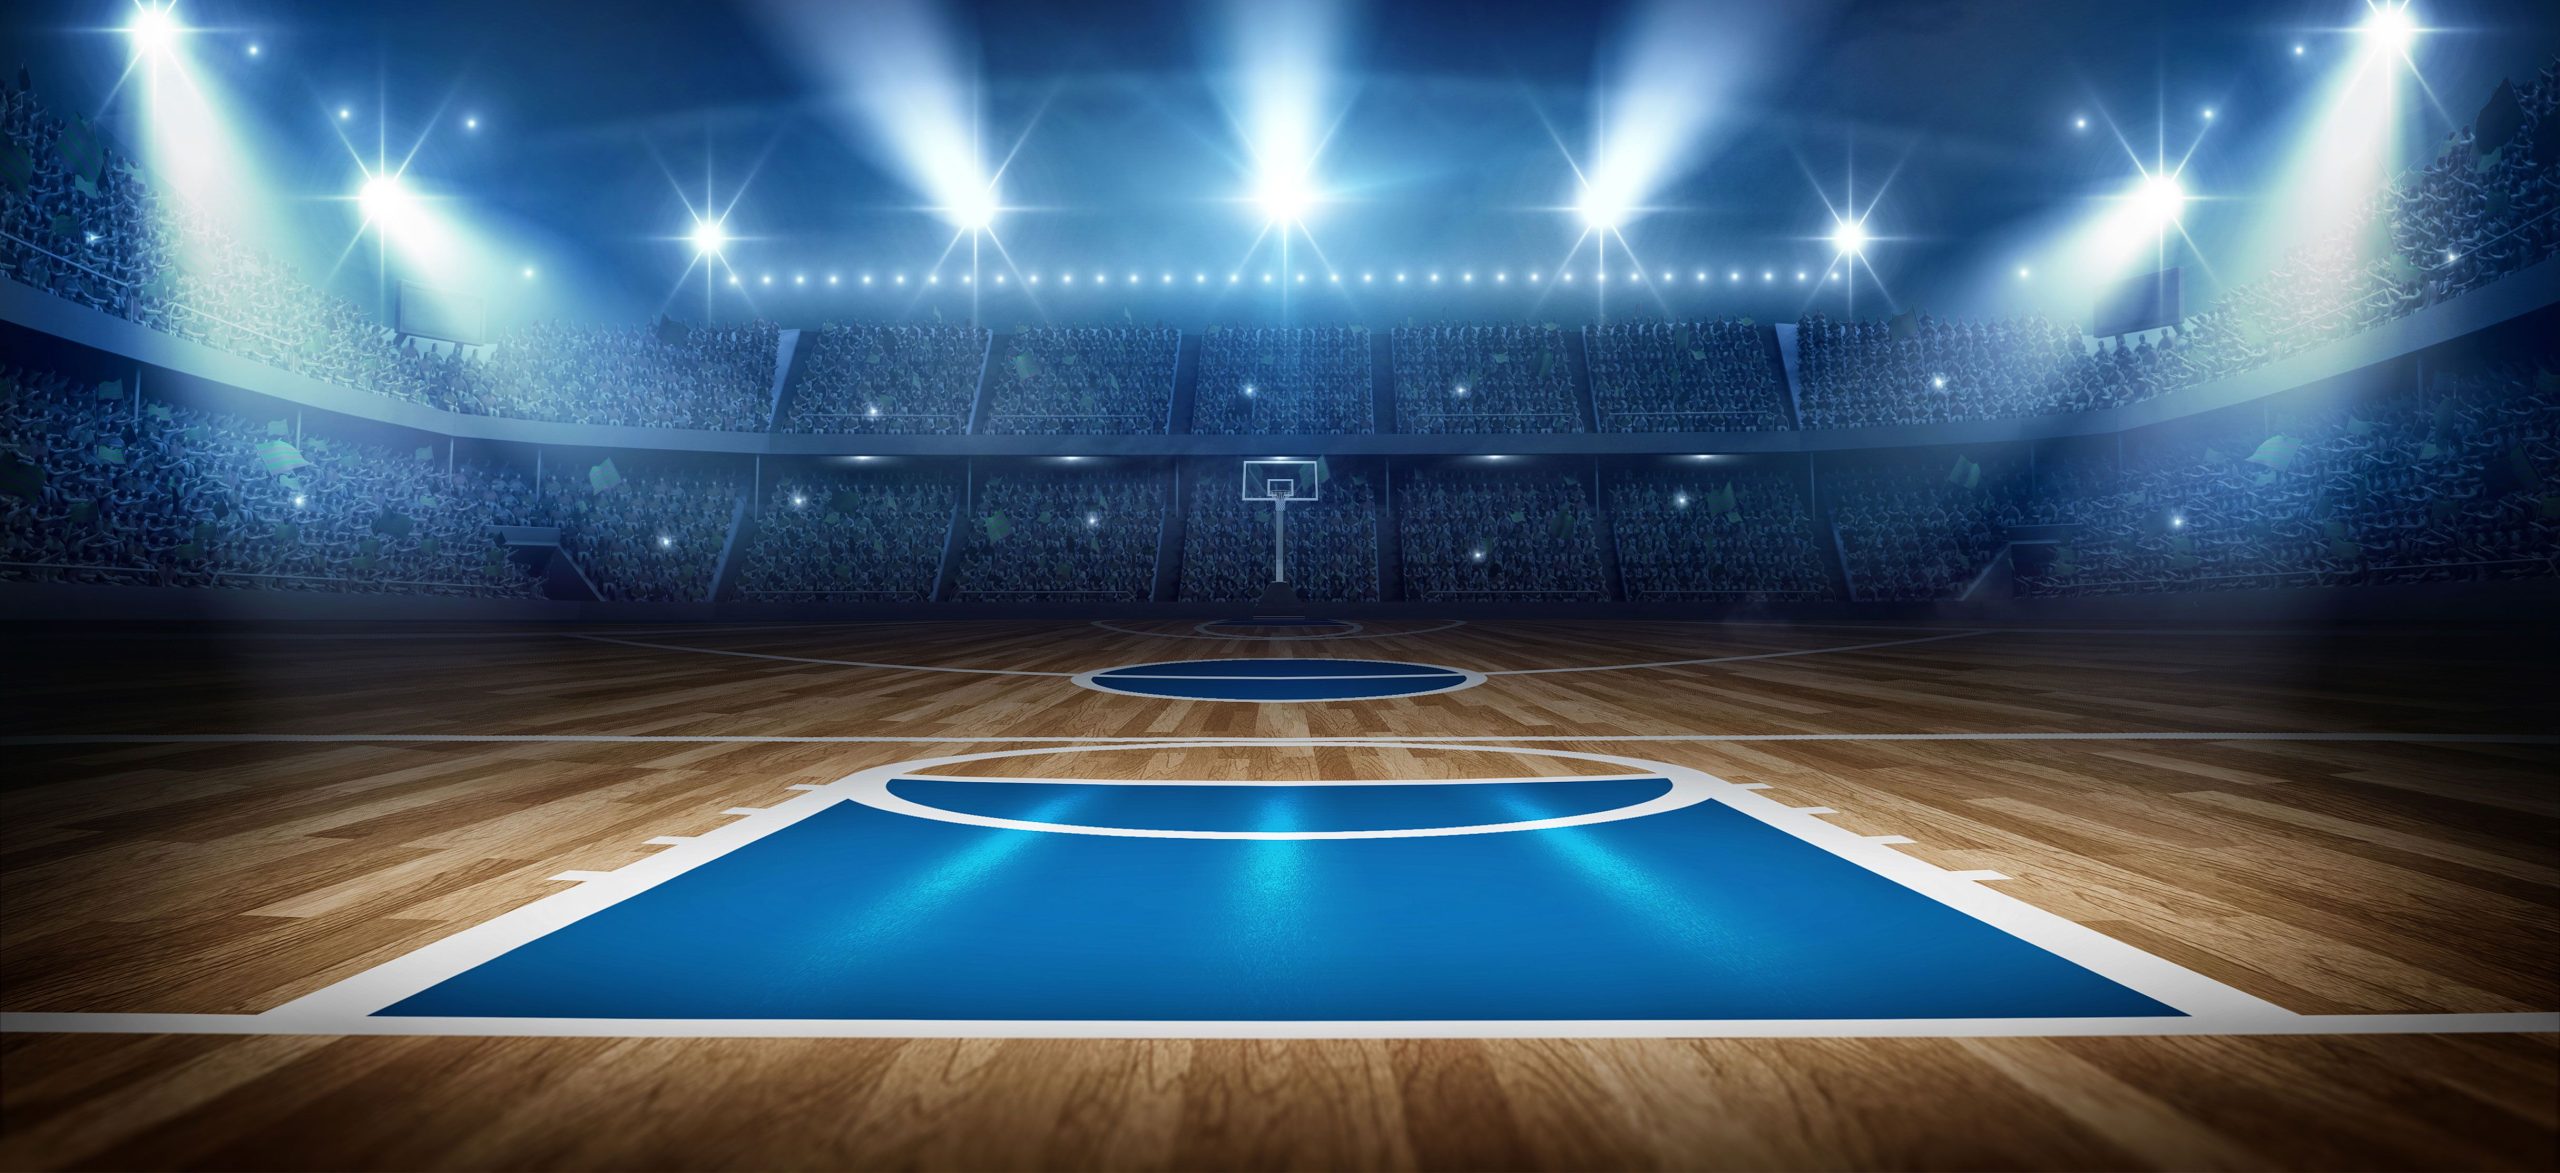 Background image for March Madness 